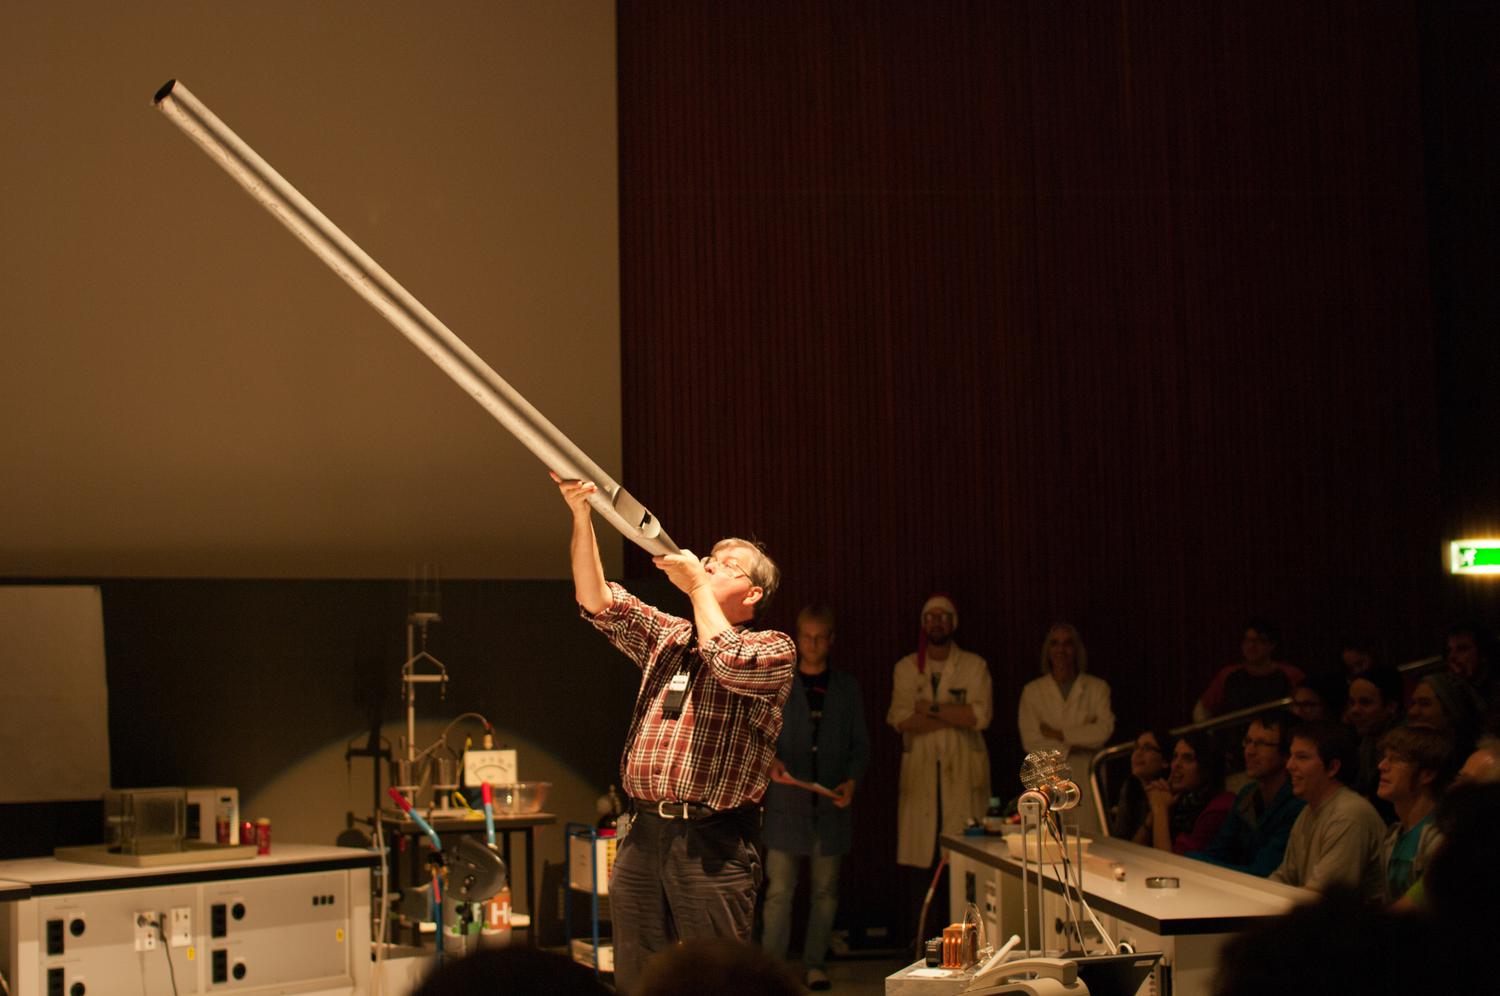 Demonstration from the physics department of an Alp horn